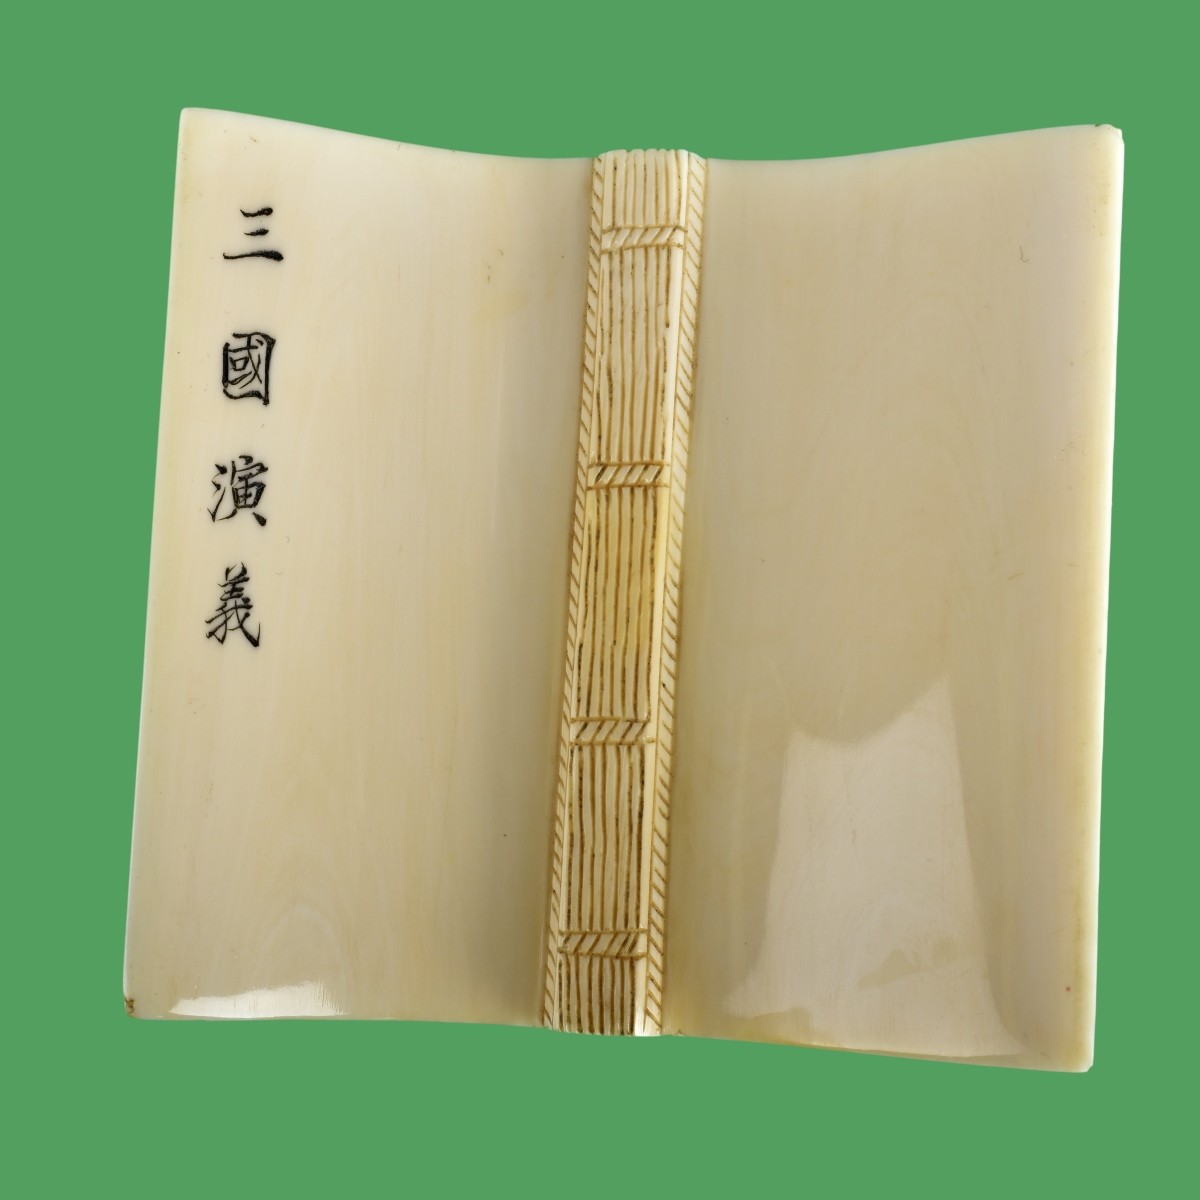 Antique Japanese Model of a Book